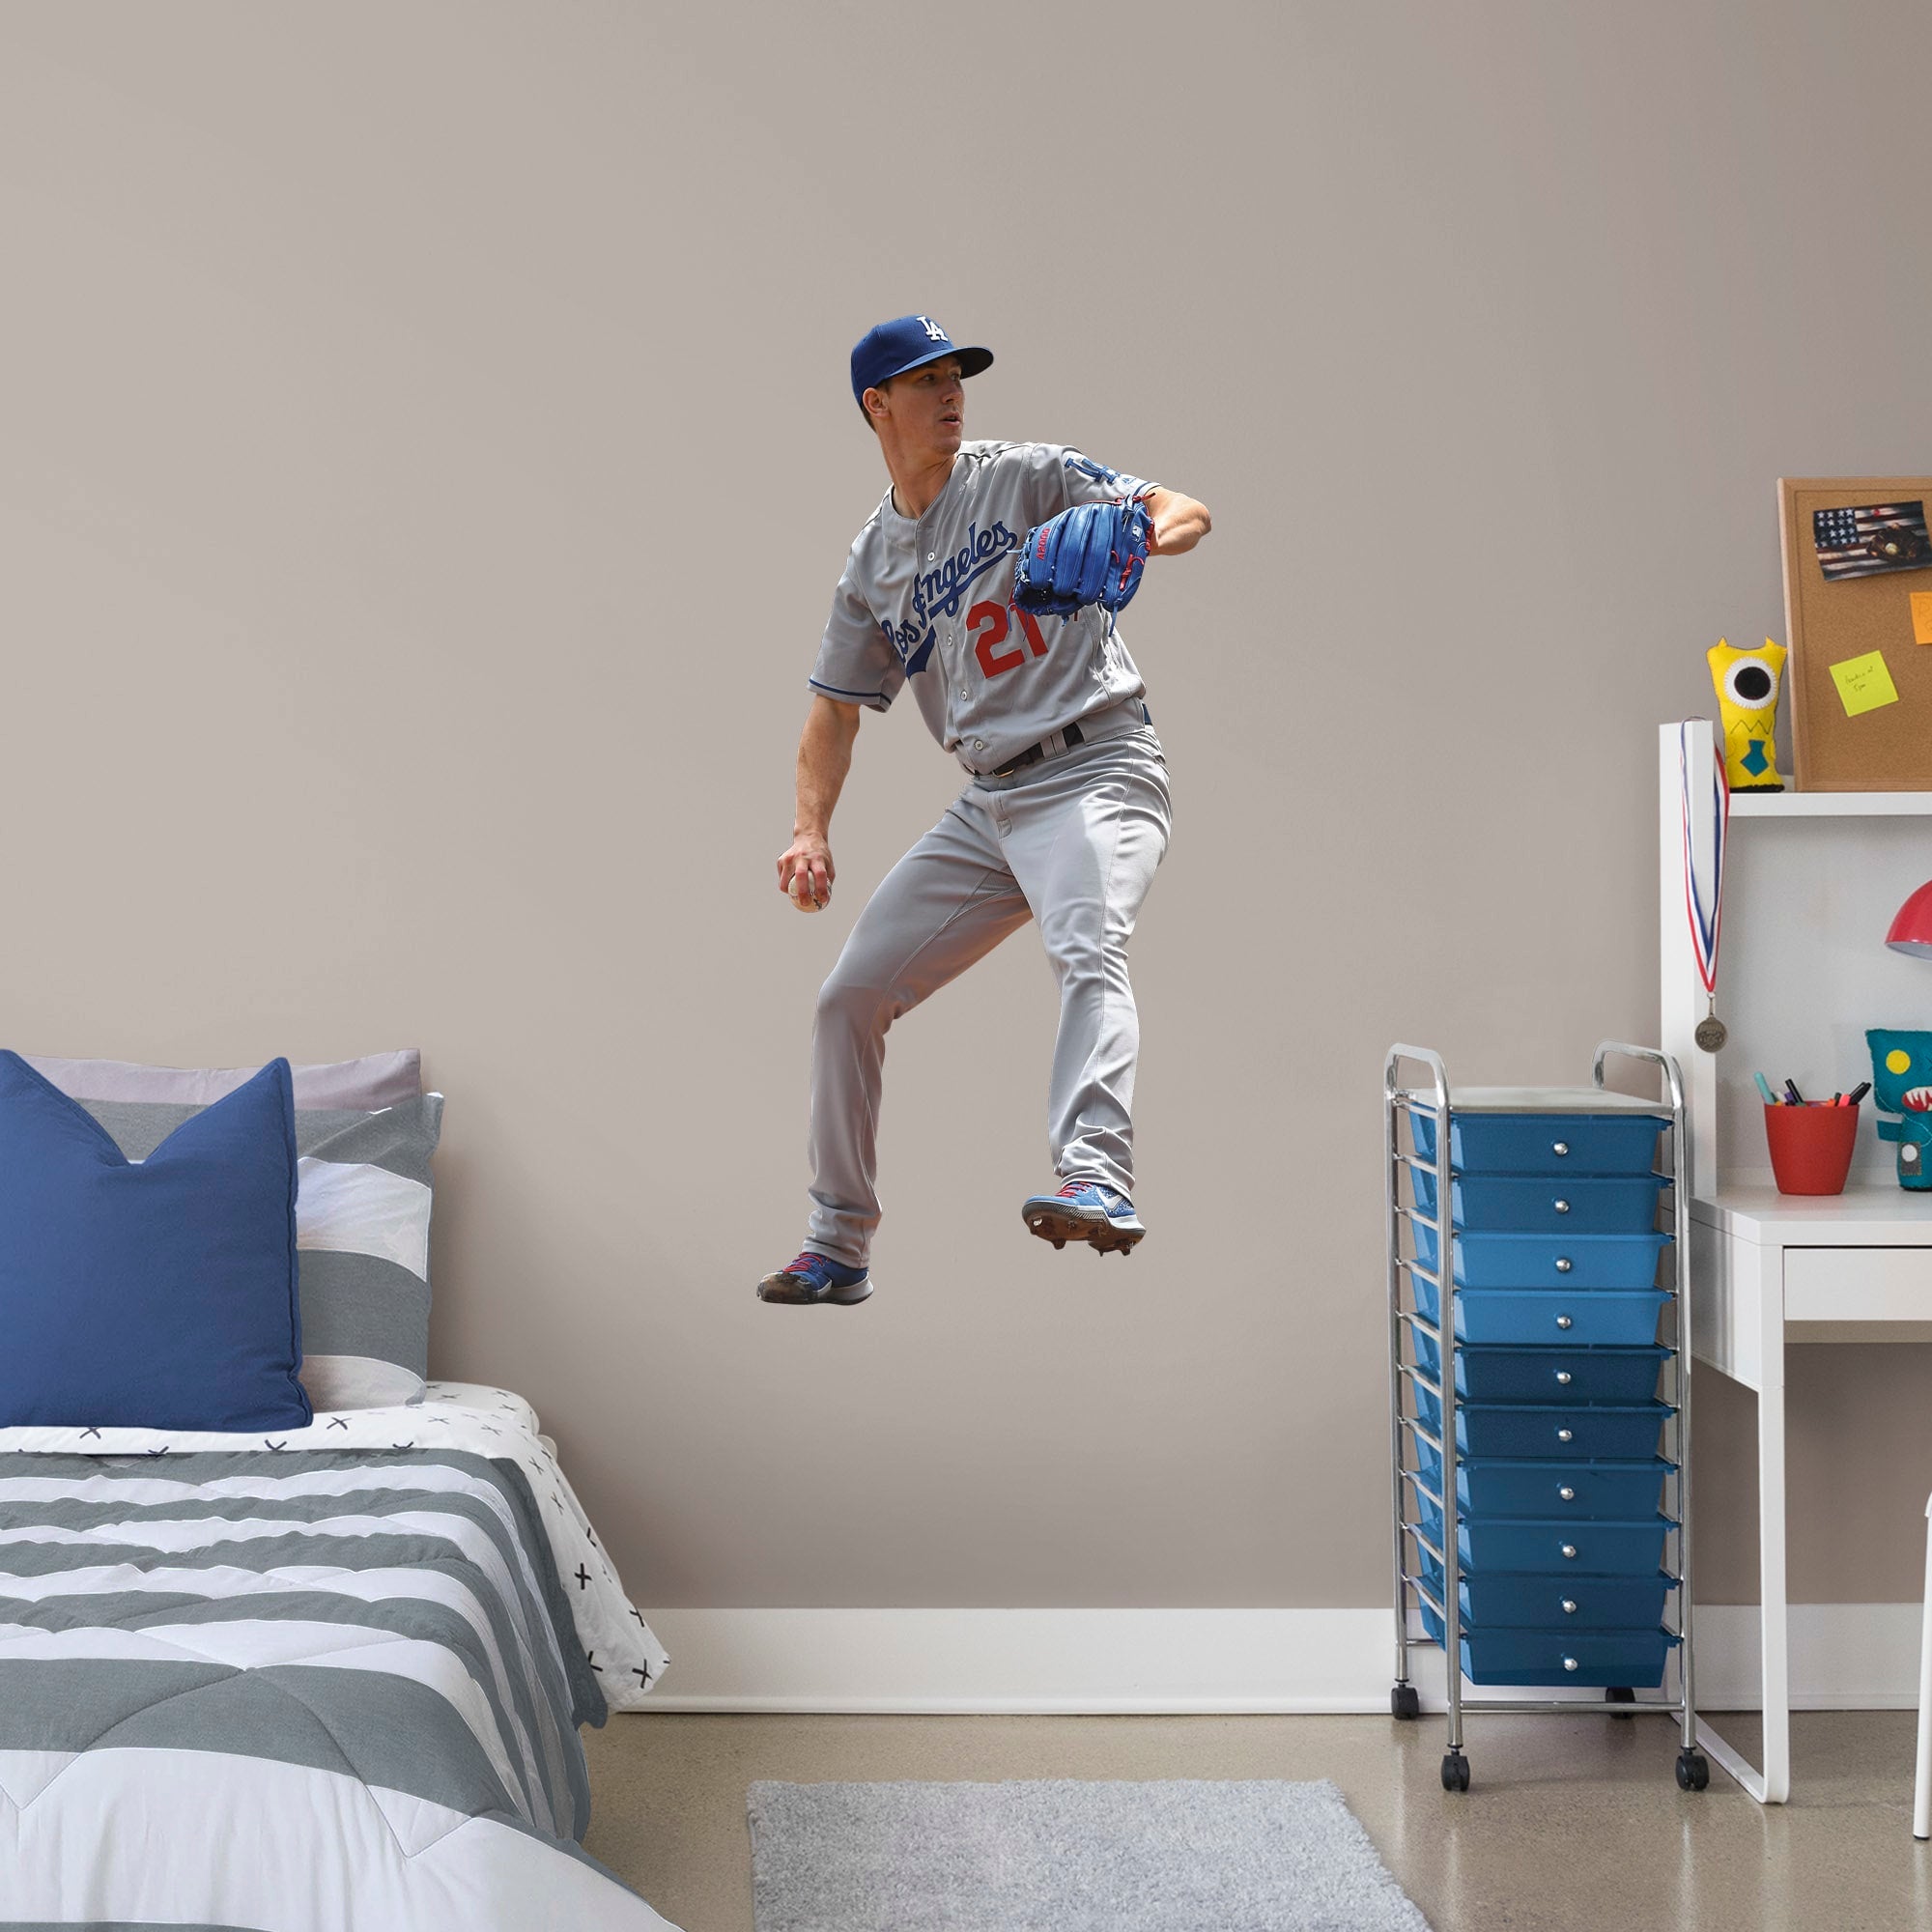 Walker Buehler for Los Angeles Dodgers - Officially Licensed MLB Removable Wall Decal Giant Athlete + 2 Decals (23"W x 51"H) by